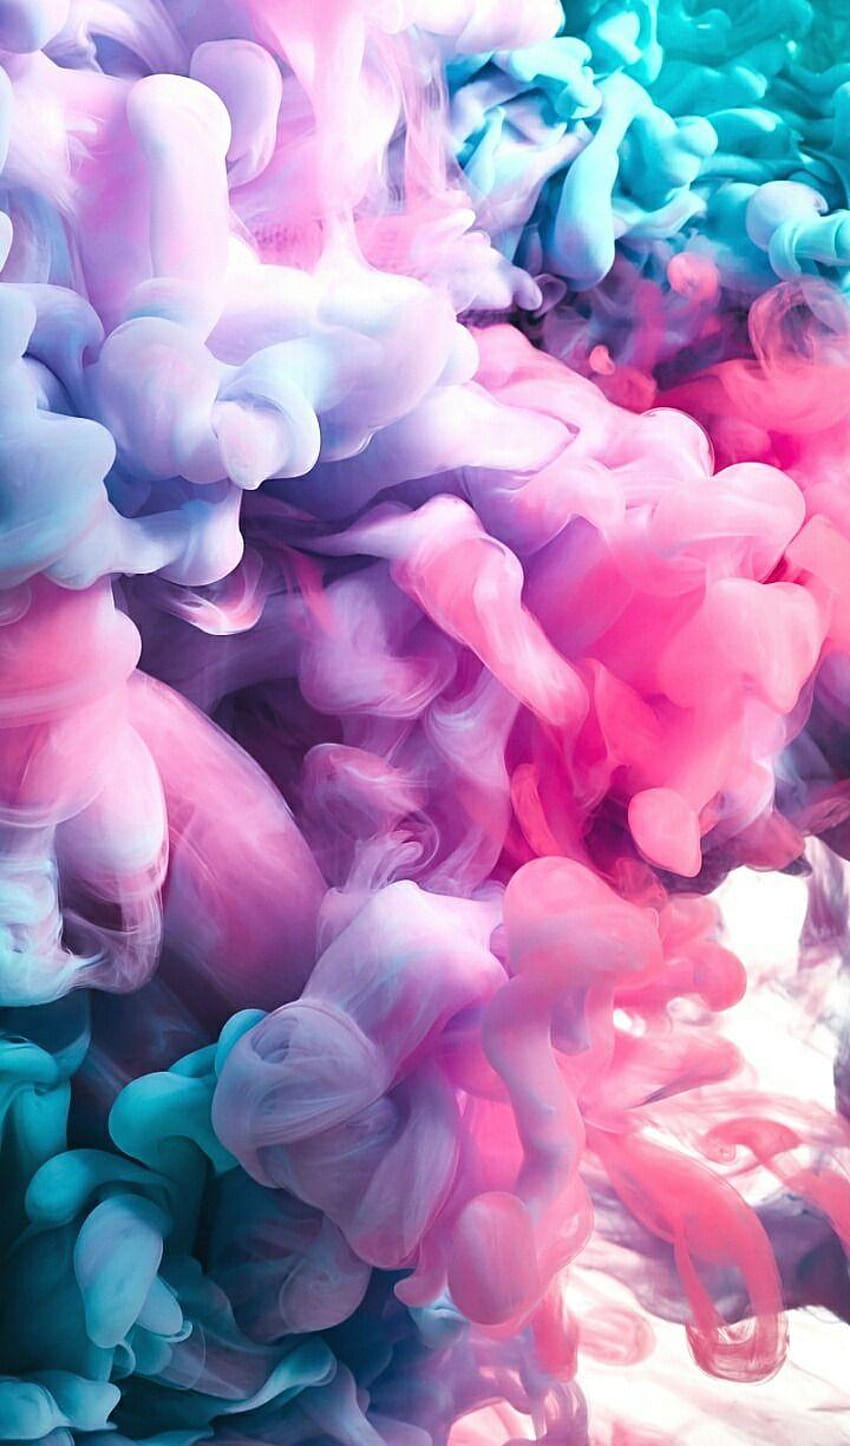 Cotton Candy wallpaper by Tw1stedB3auty  Download on ZEDGE  d176